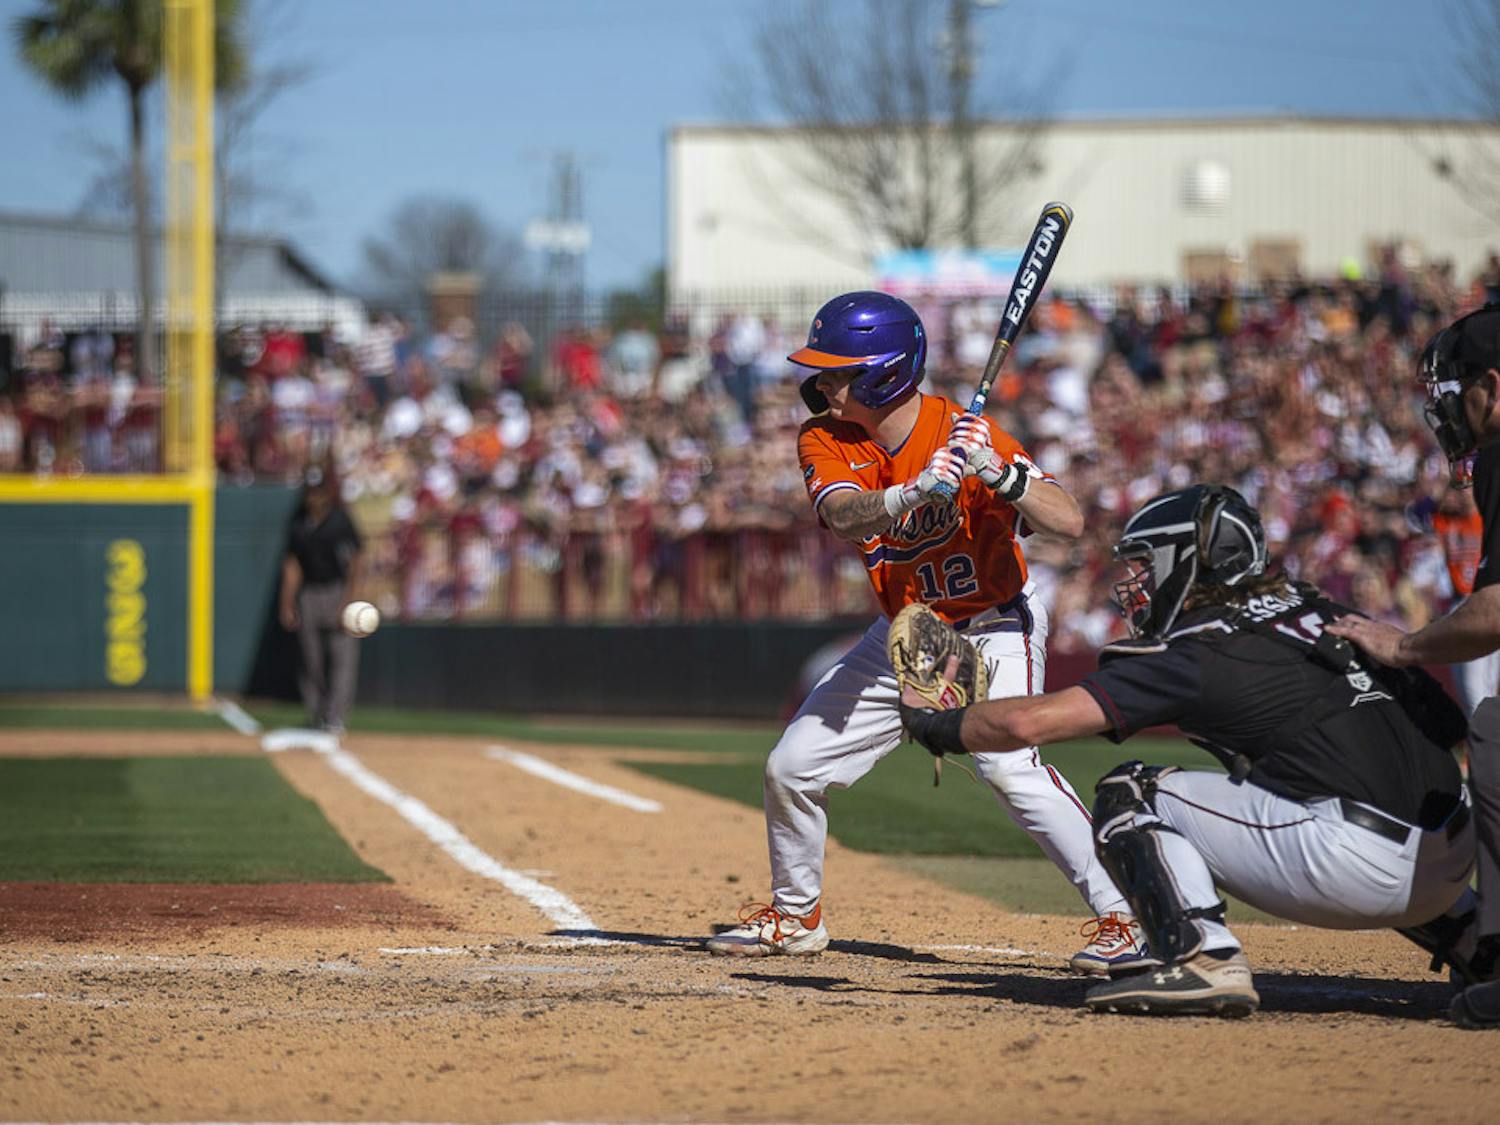 Sophomore catcher Cole Messina prepares to catch a strike during the rivalry matchup between South Carolina and Clemson on March 5, 2023, at Founders Park. The Gamecocks beat the Tigers 7-1.